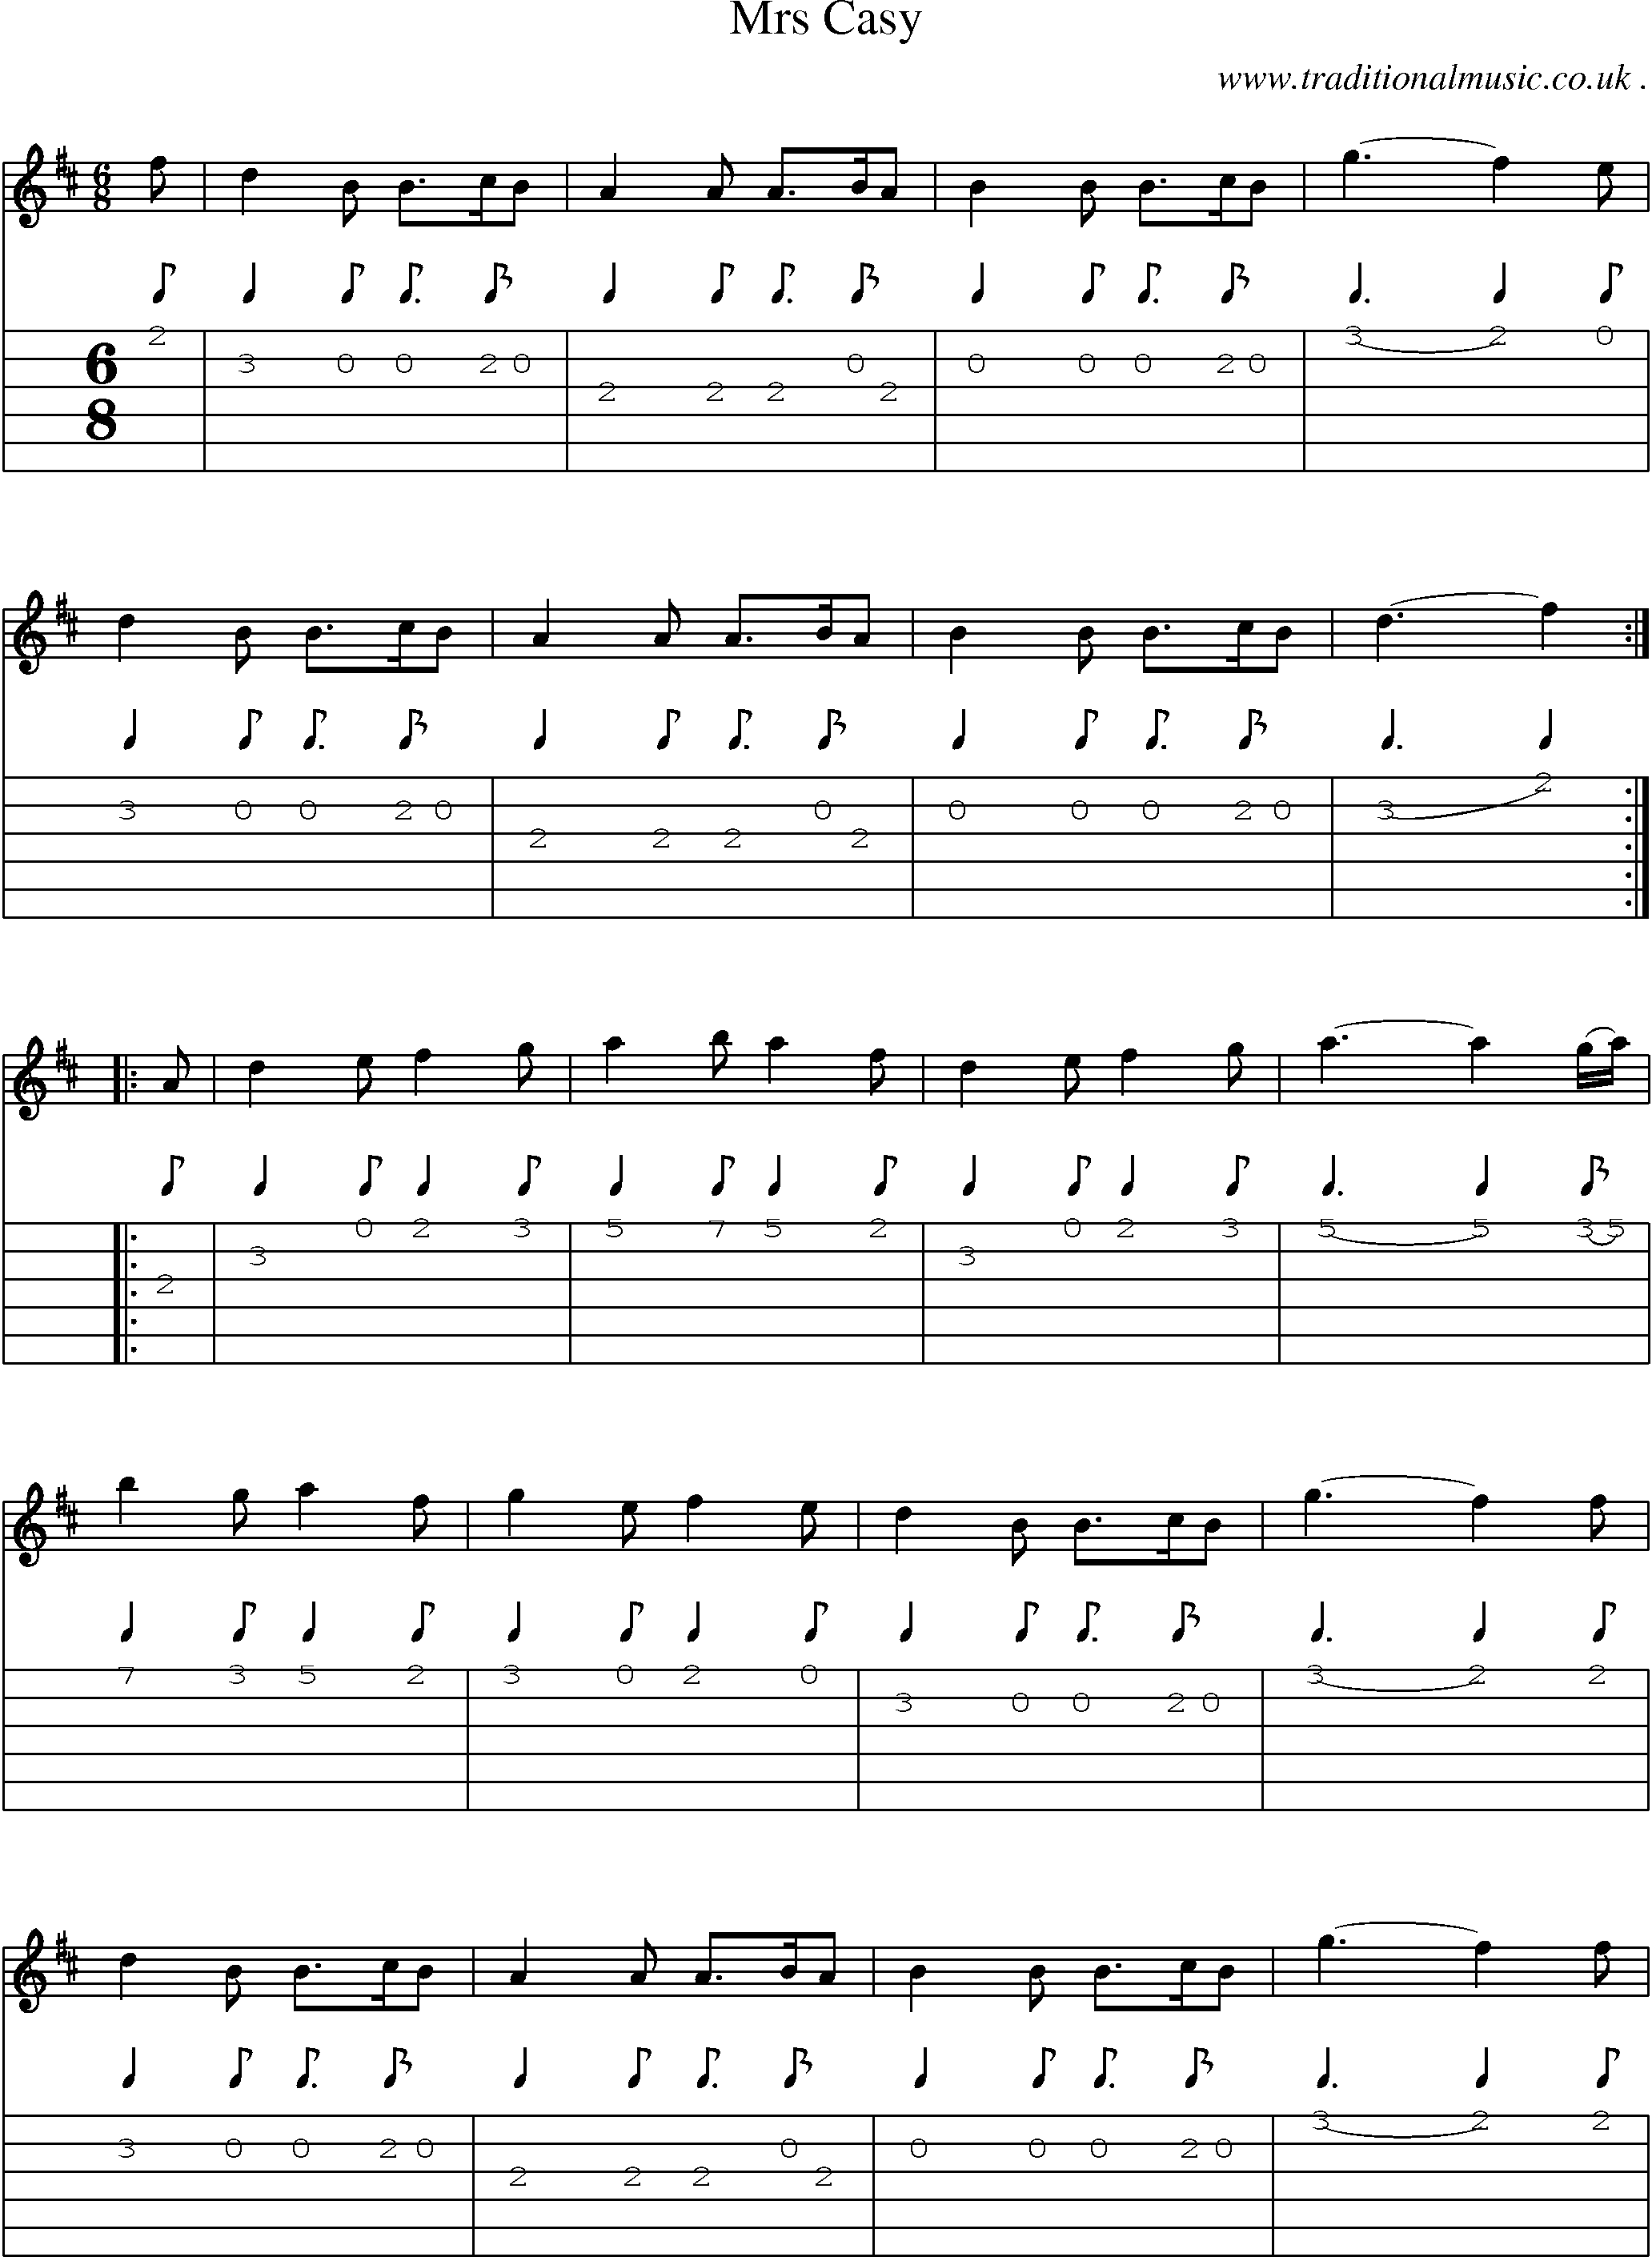 Sheet-Music and Guitar Tabs for Mrs Casy